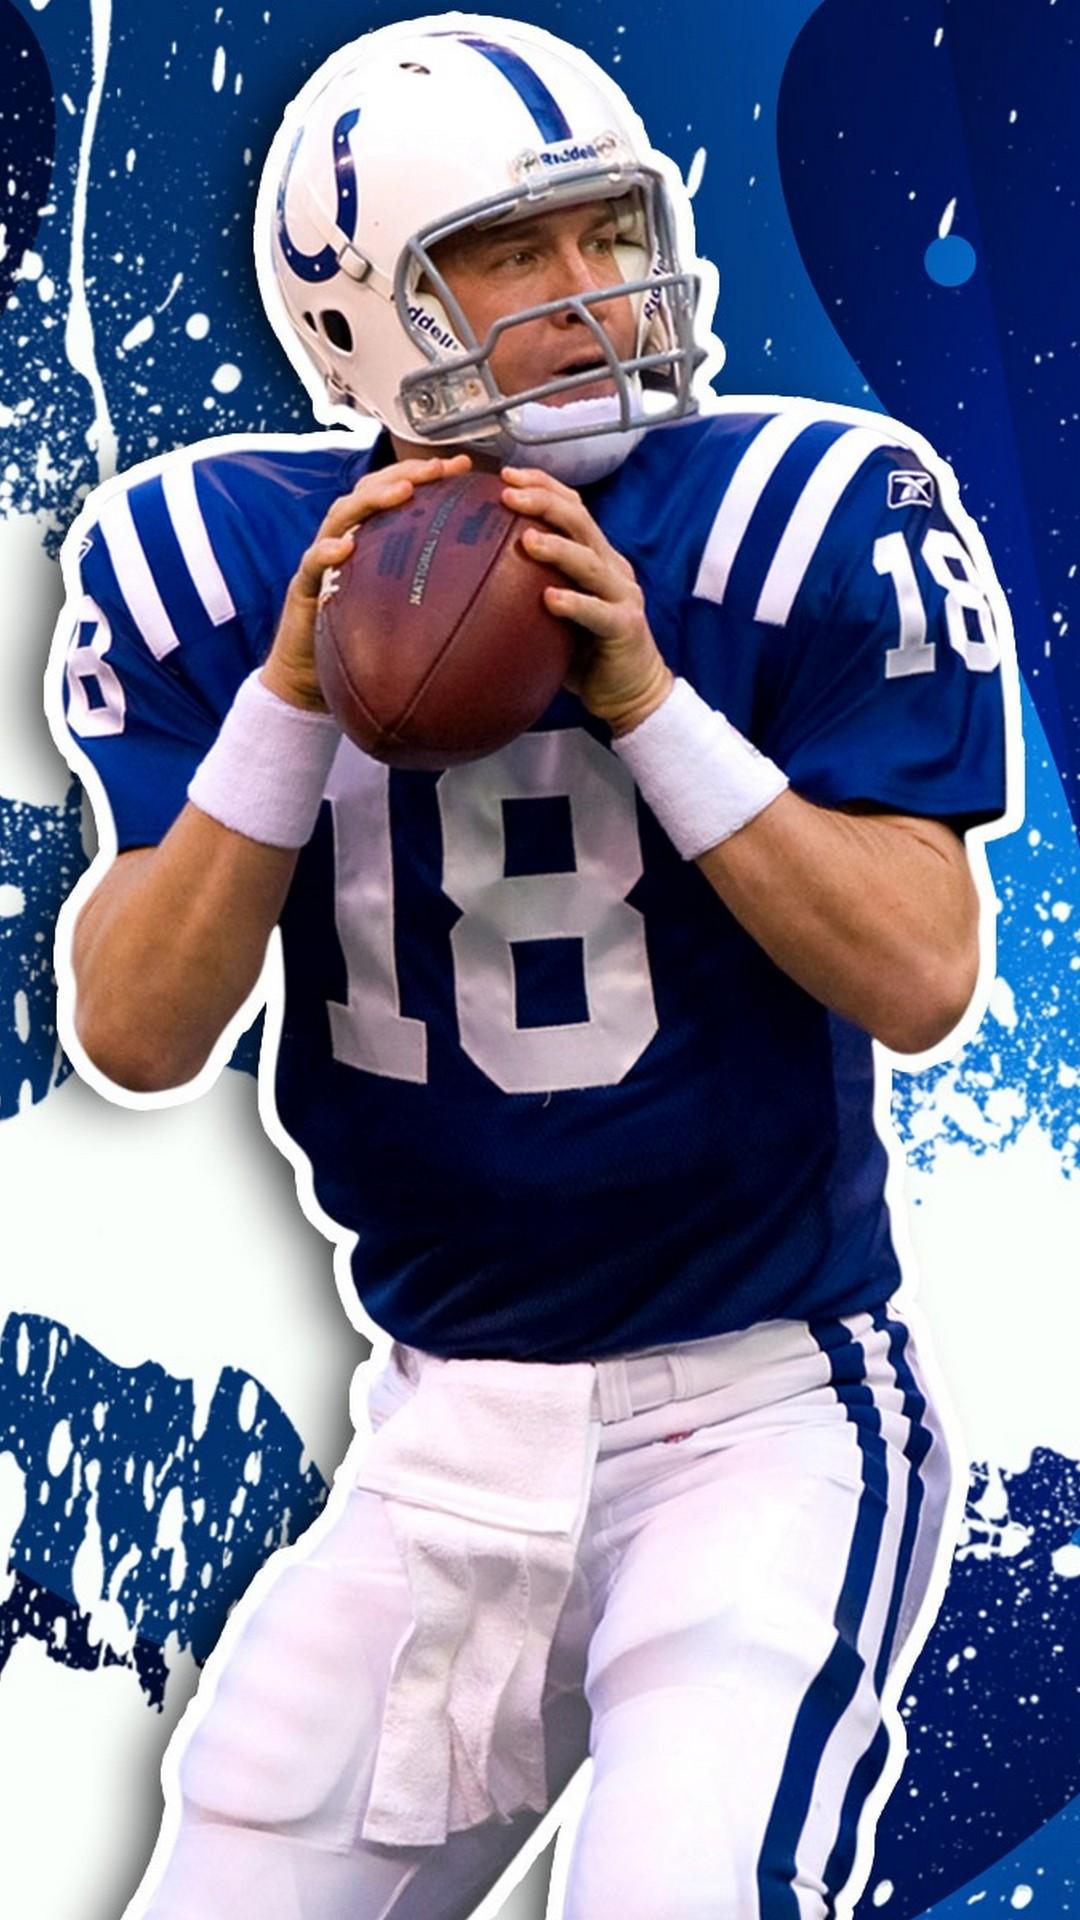 iPhone Wallpaper HD Peyton Manning Indianapolis Colts NFL